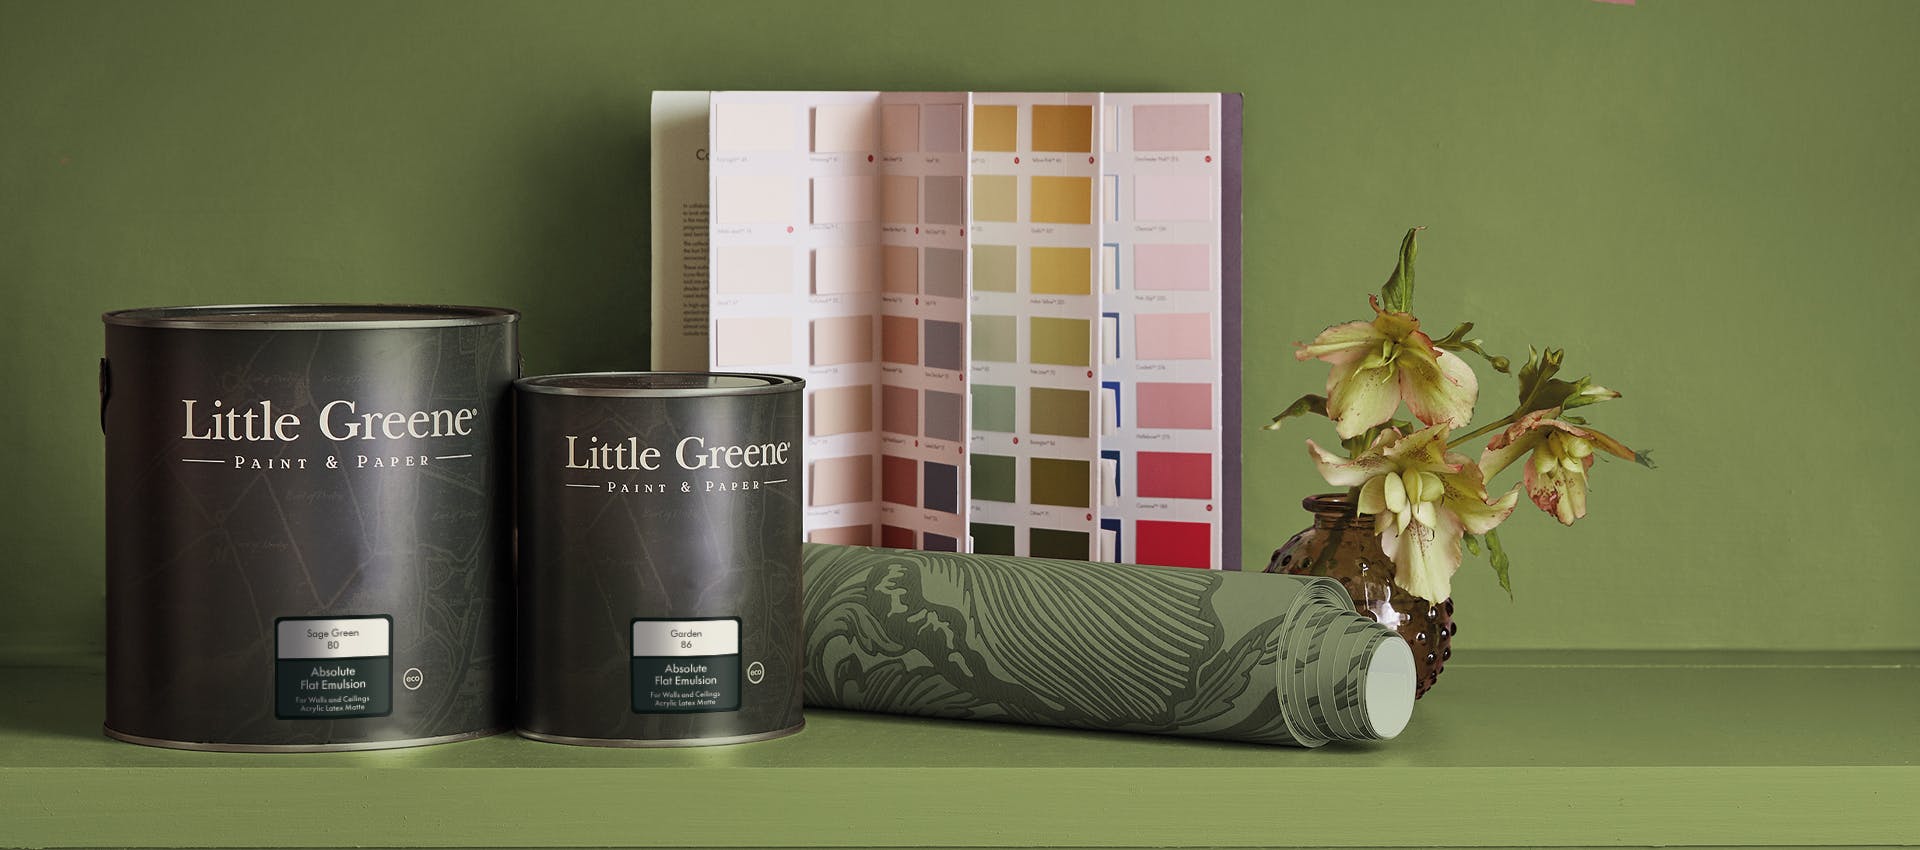 A shelf and wall painted in green (Garden) with two paint cans, an open colour card, a roll of floral green wallpaper (Poppy Trail - Sage Green) and a small plant in a round vase on top of the shelf.